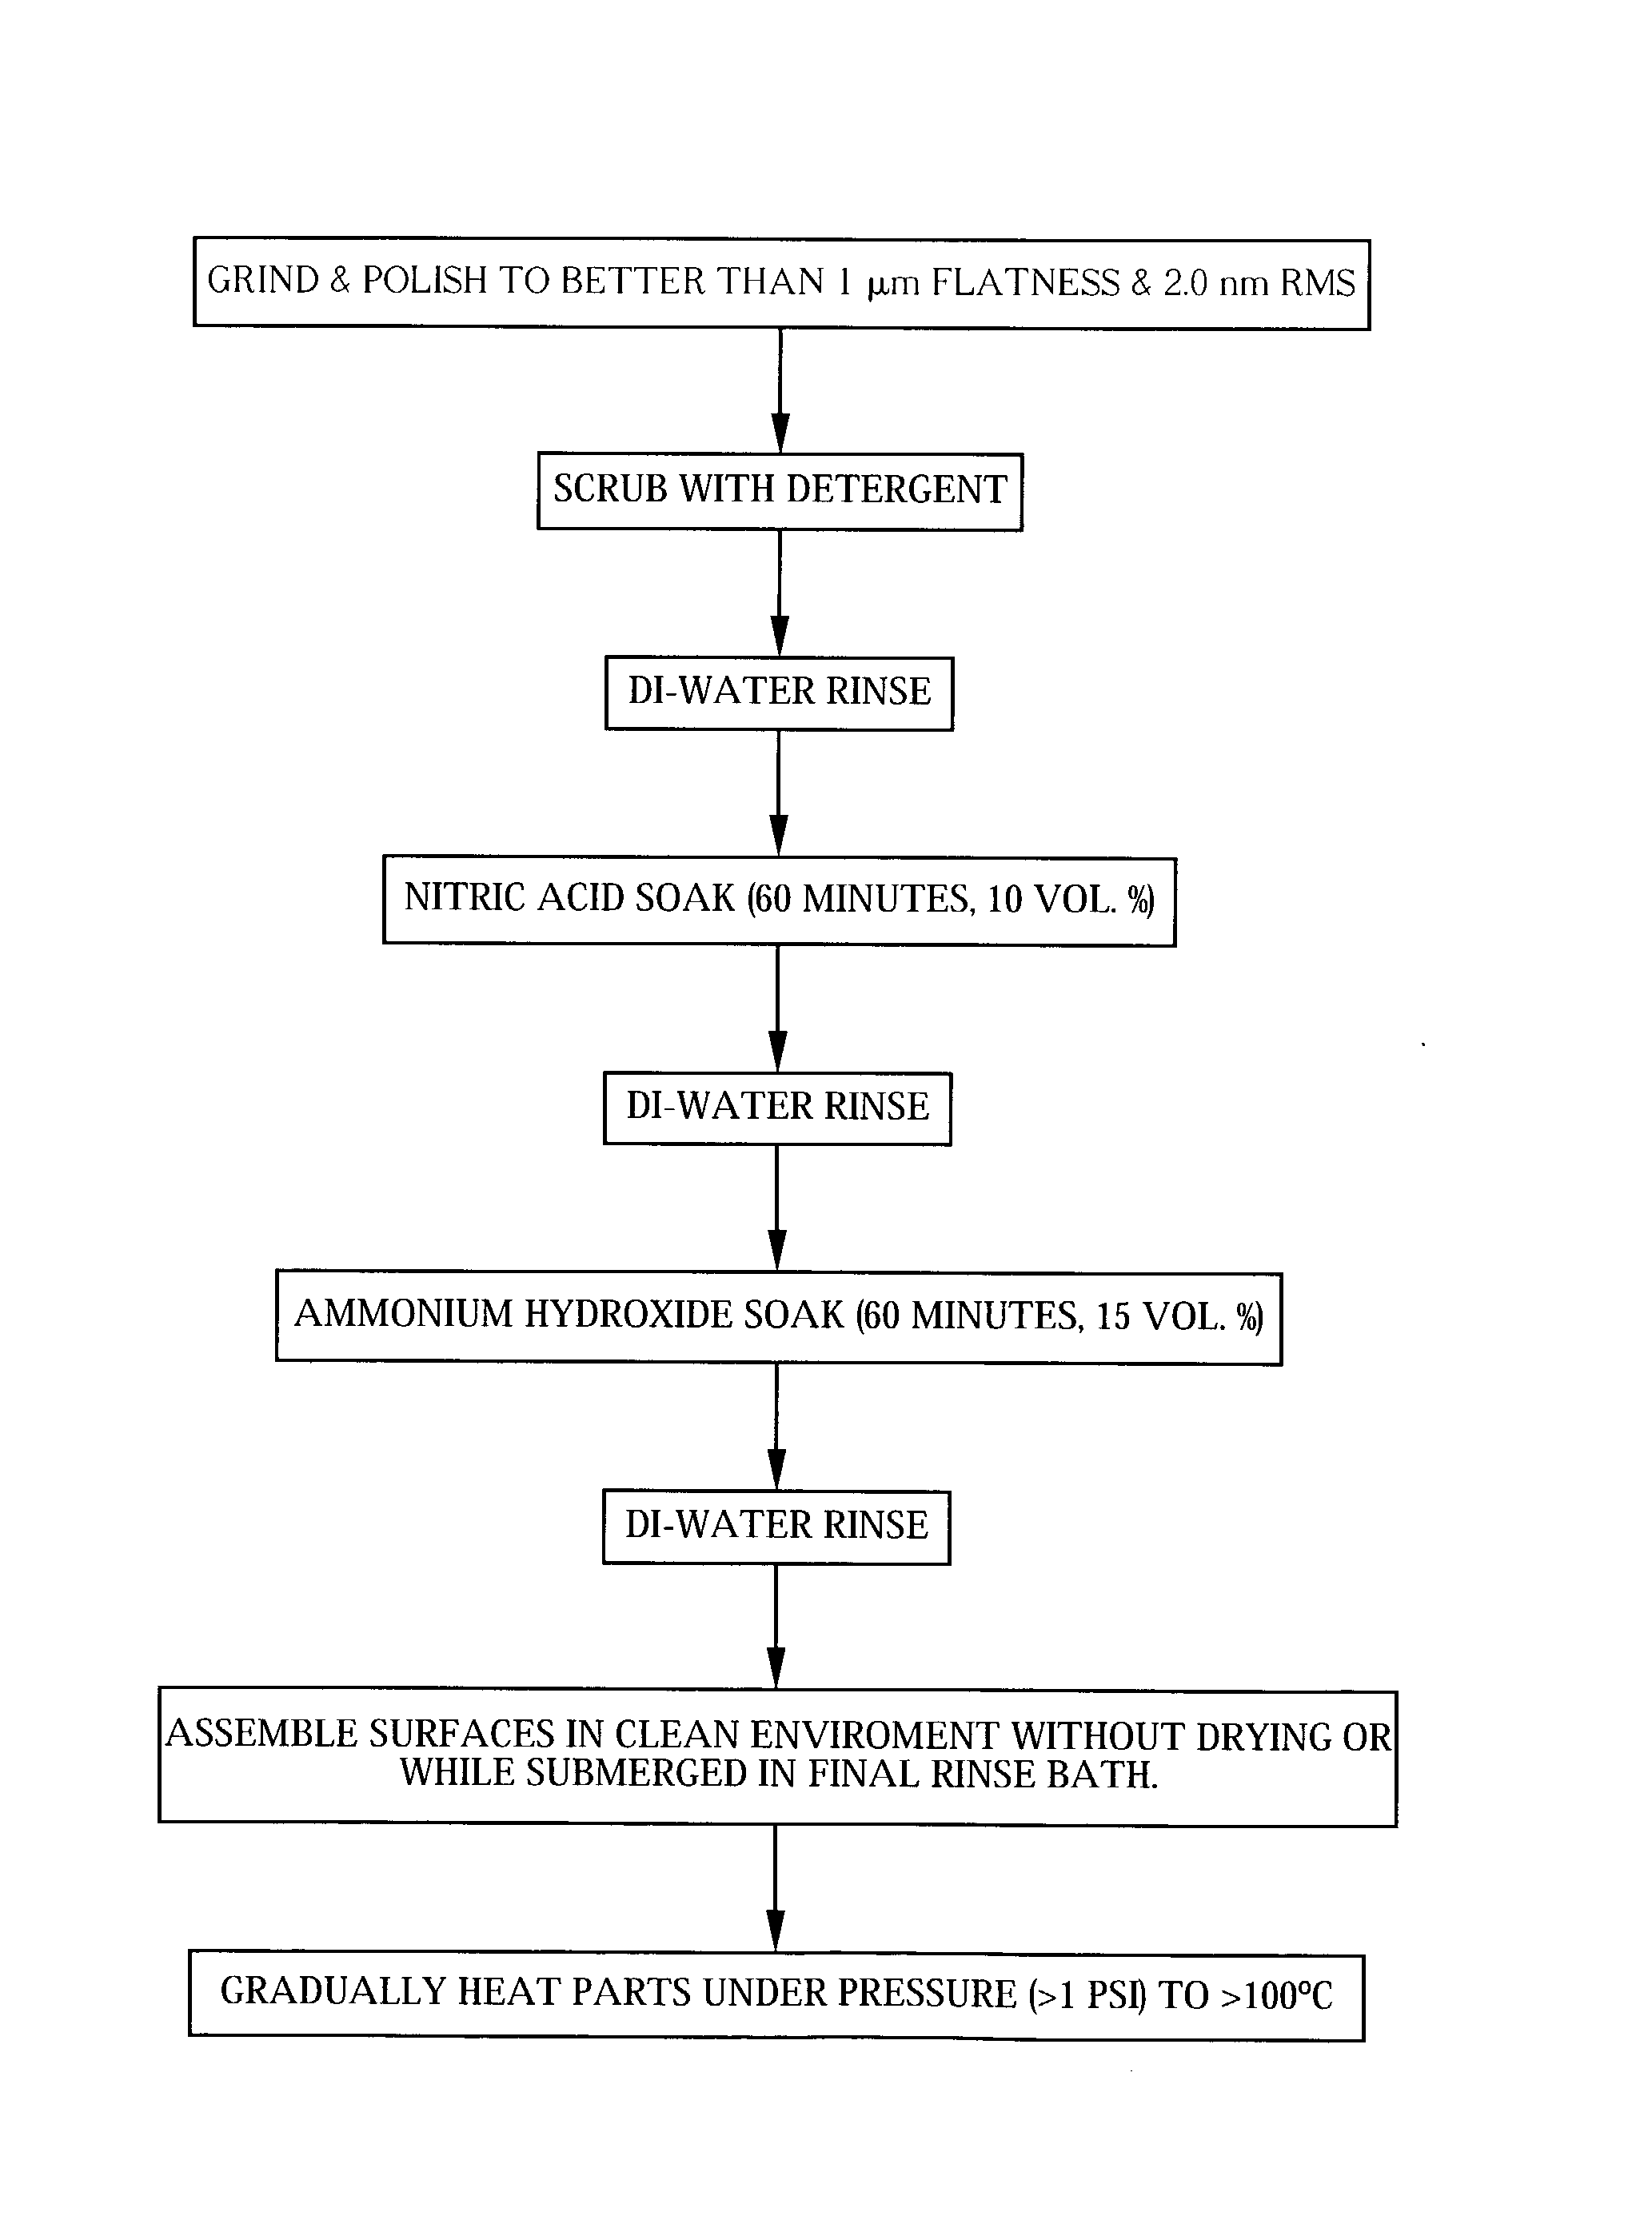 Direct bonding of articles containing silicon